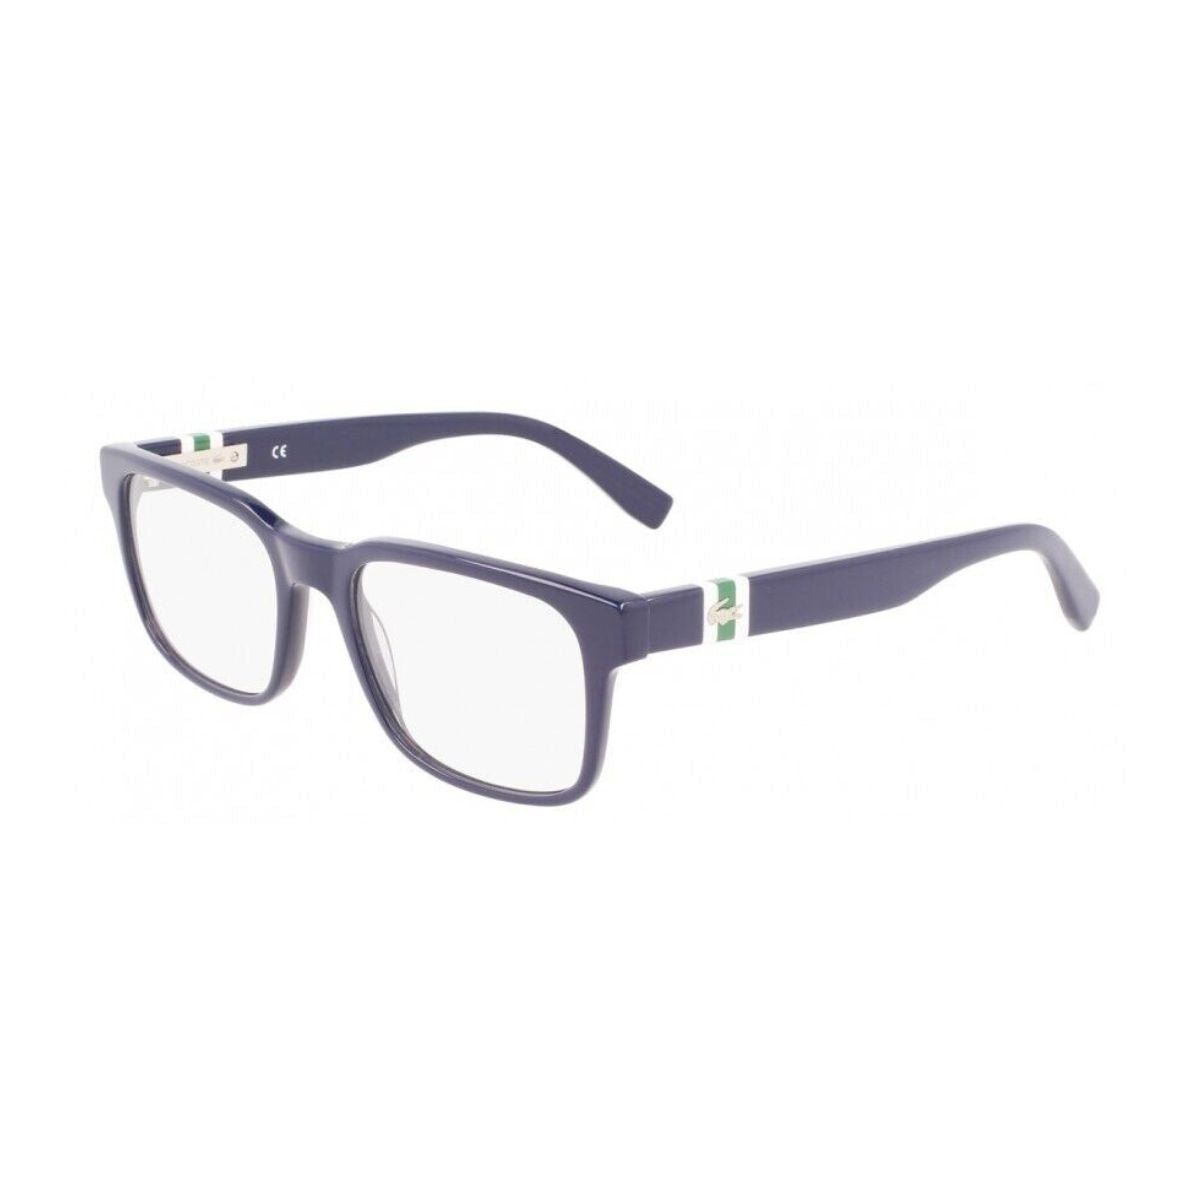 "buy Lacoste 2905 400 stylish black color frame for men and women online at optorium"